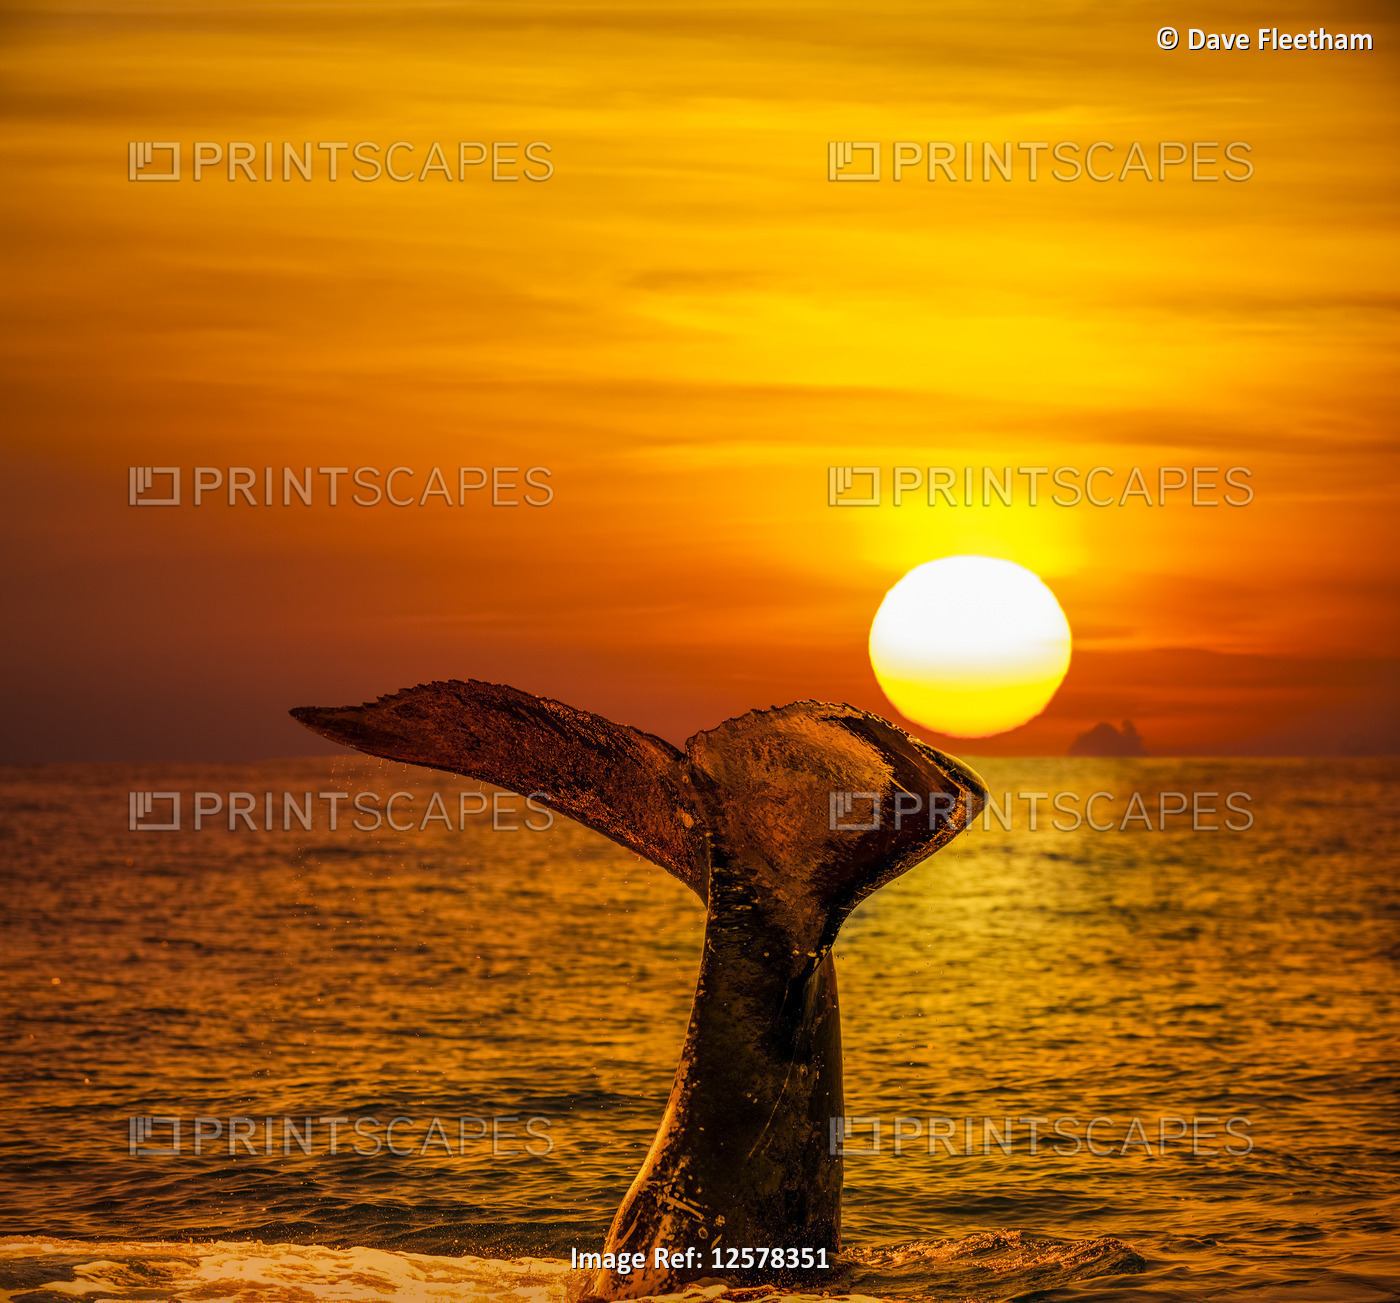 A humpback whale (Megaptera novaeangliae) lifts it's tail in the air at sunset; ...